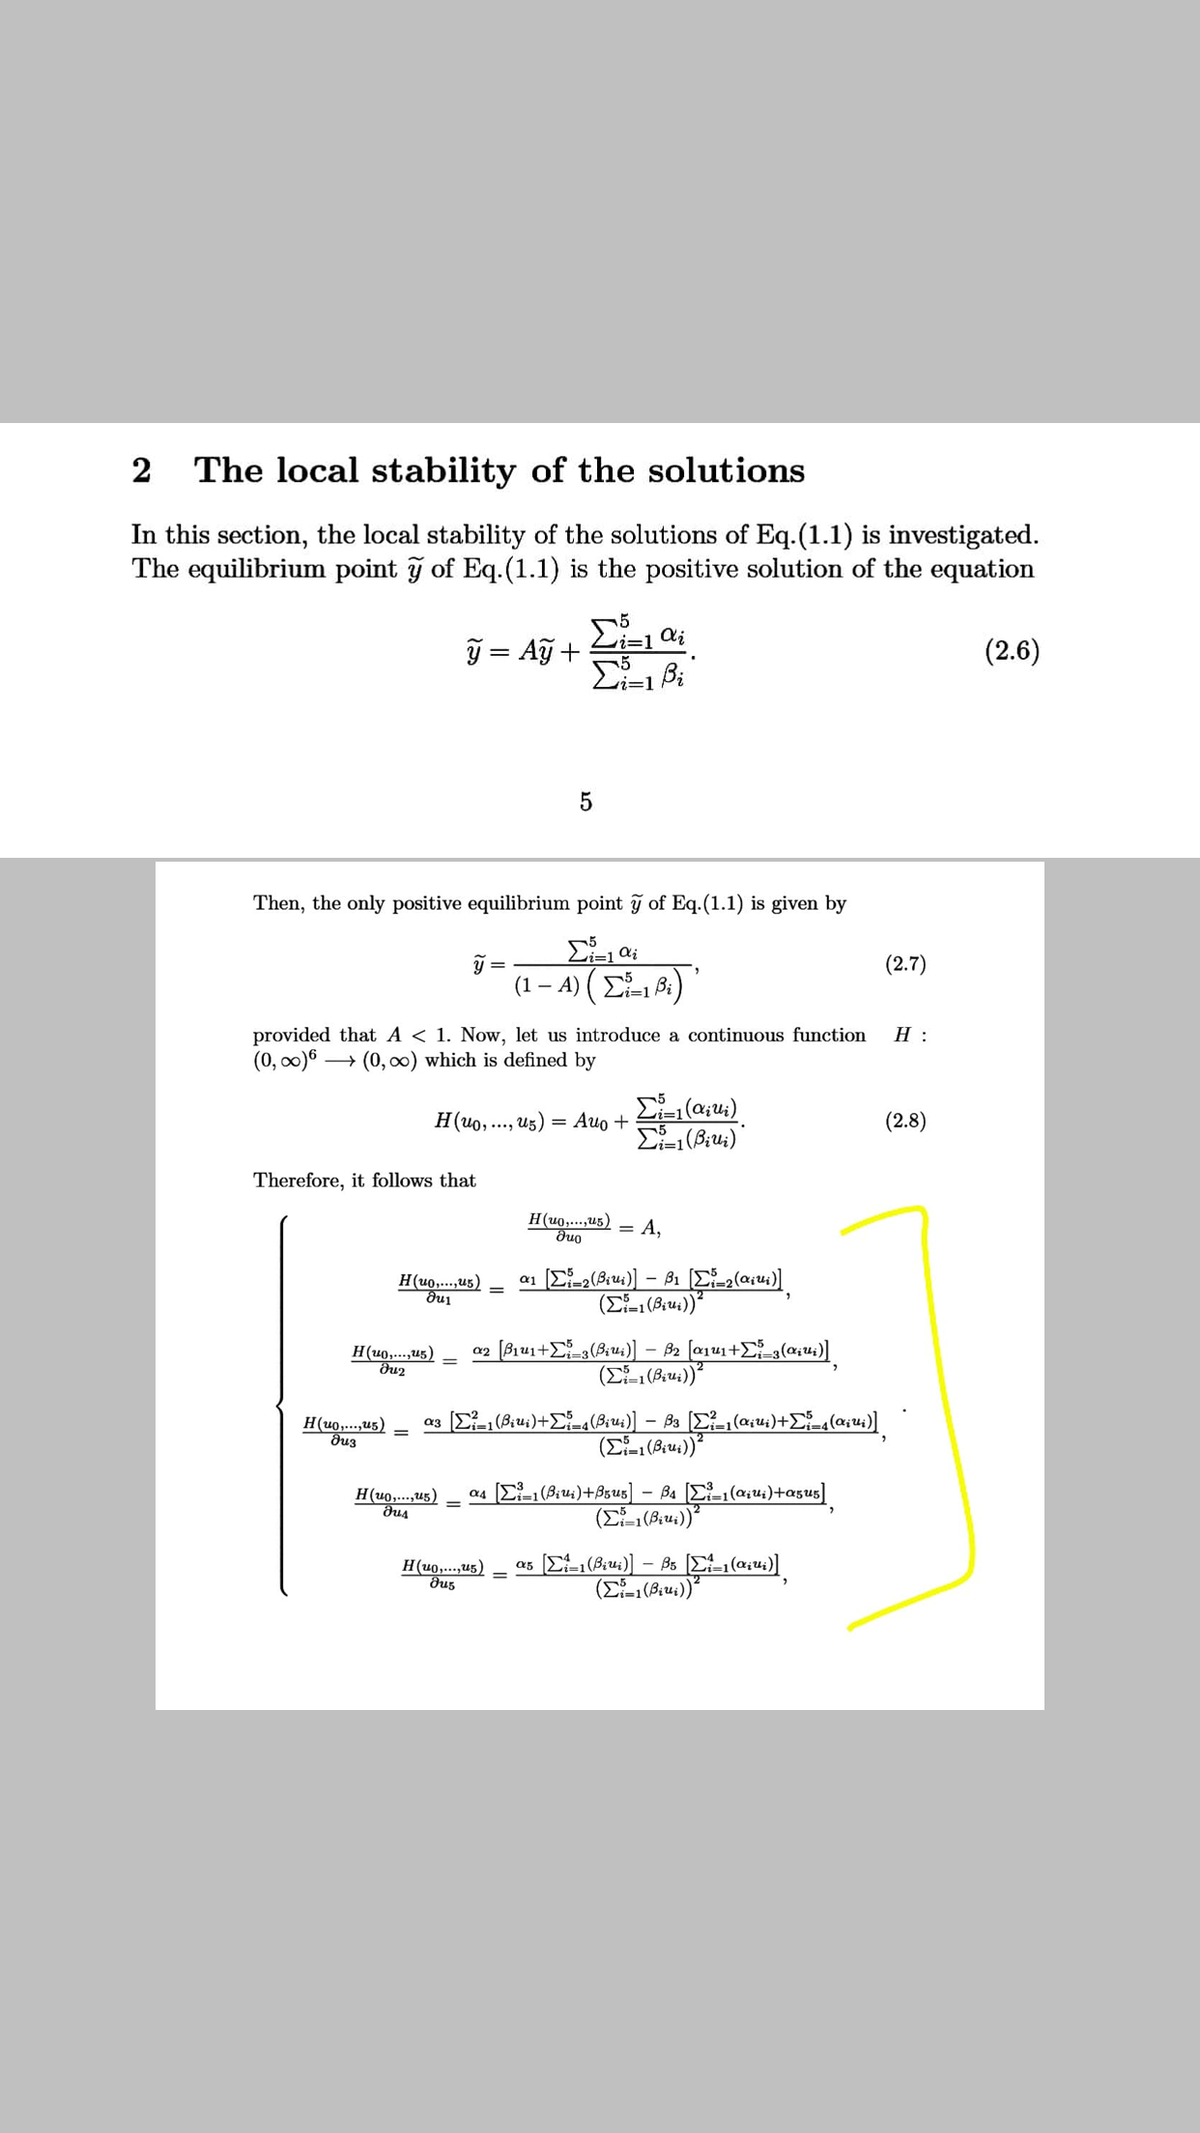 2 The local stability of the solutions
In this section, the local stability of the solutions of Eq.(1.1) is investigated.
The equilibrium point ỹ of Eq.(1.1) is the positive solution of the equation
ỹ = Aỹ + Li-1i
(2.6)
Then, the only positive equilibrium point ỹ of Eq.(1.1) is given by
y =
(2.7)
(1 – A) (E )
vi=1
provided that A < 1. Now, let us introduce a continuous function
(0, 00)6 –
H :
→ (0, 00) which is defined by
H(uo,..., u5) = Auo +
(2.8)
Therefore, it follows that
H(uo,..,u5)
duo
A,
H(uo,...,u5)
H(u0,..,u5)
a2
-
(EL (B:u4))"
H(u0,...,u5)
duz
a3 (E (B;u;)+E-4(Biu;)] – Ba (Ei_,(a;u;)+£{-q(a;u;)]
H(uo,...,u5)
as (E-1 (Biu:)+Bzus] – Ba [E-1(a;u;)+a5u5]
H(u0,..,u5)
a5
